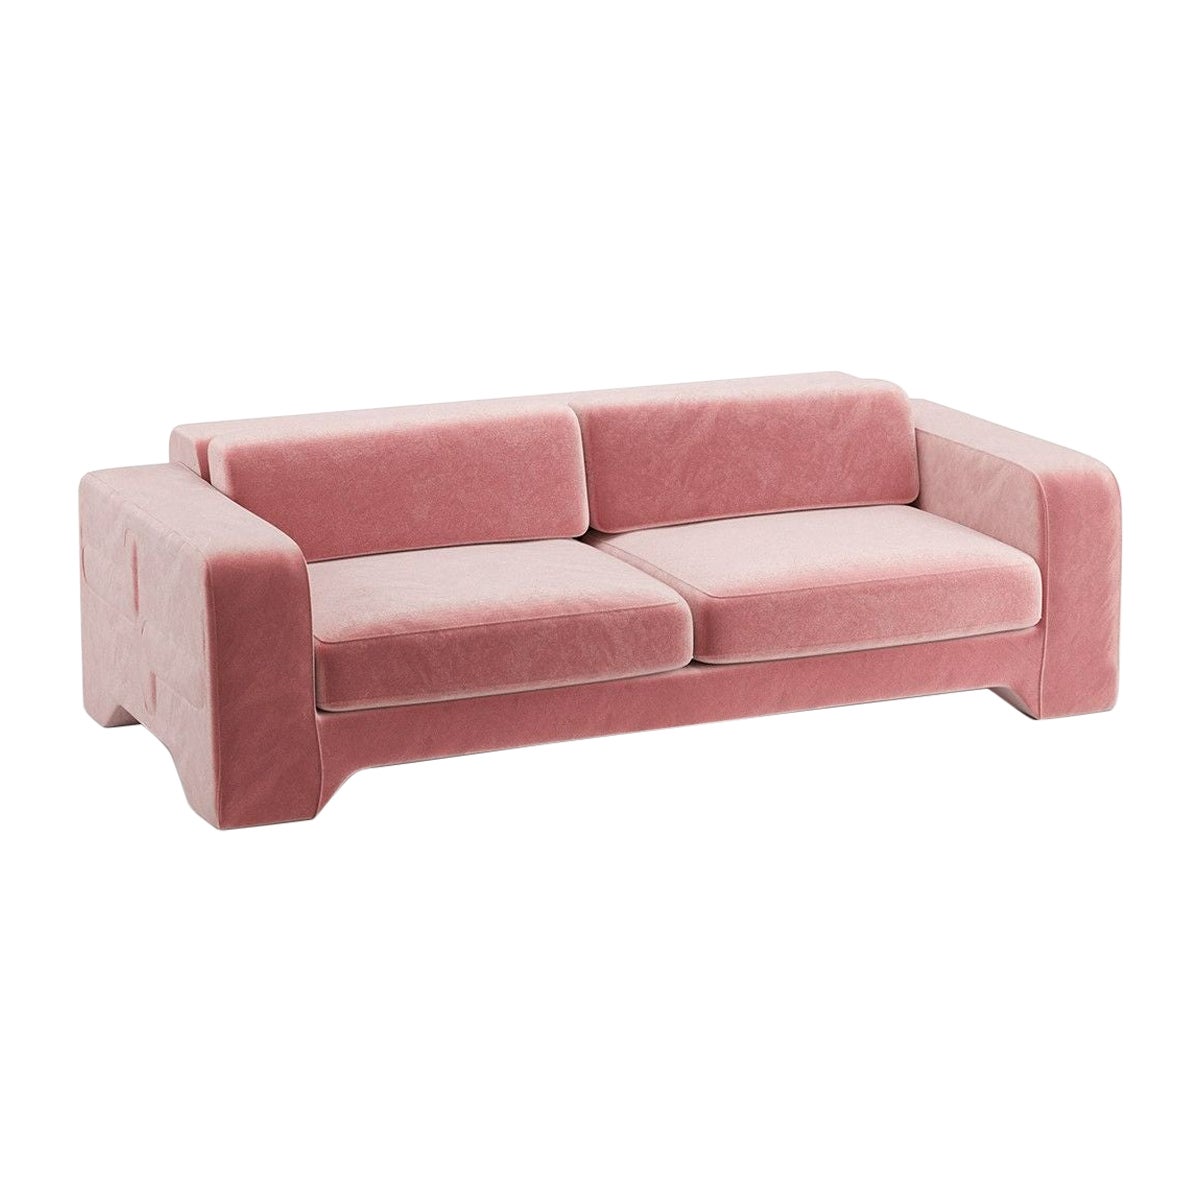 Popus Editions Giovanna 4 Seater Sofa in Pink Verone Velvet Upholstery